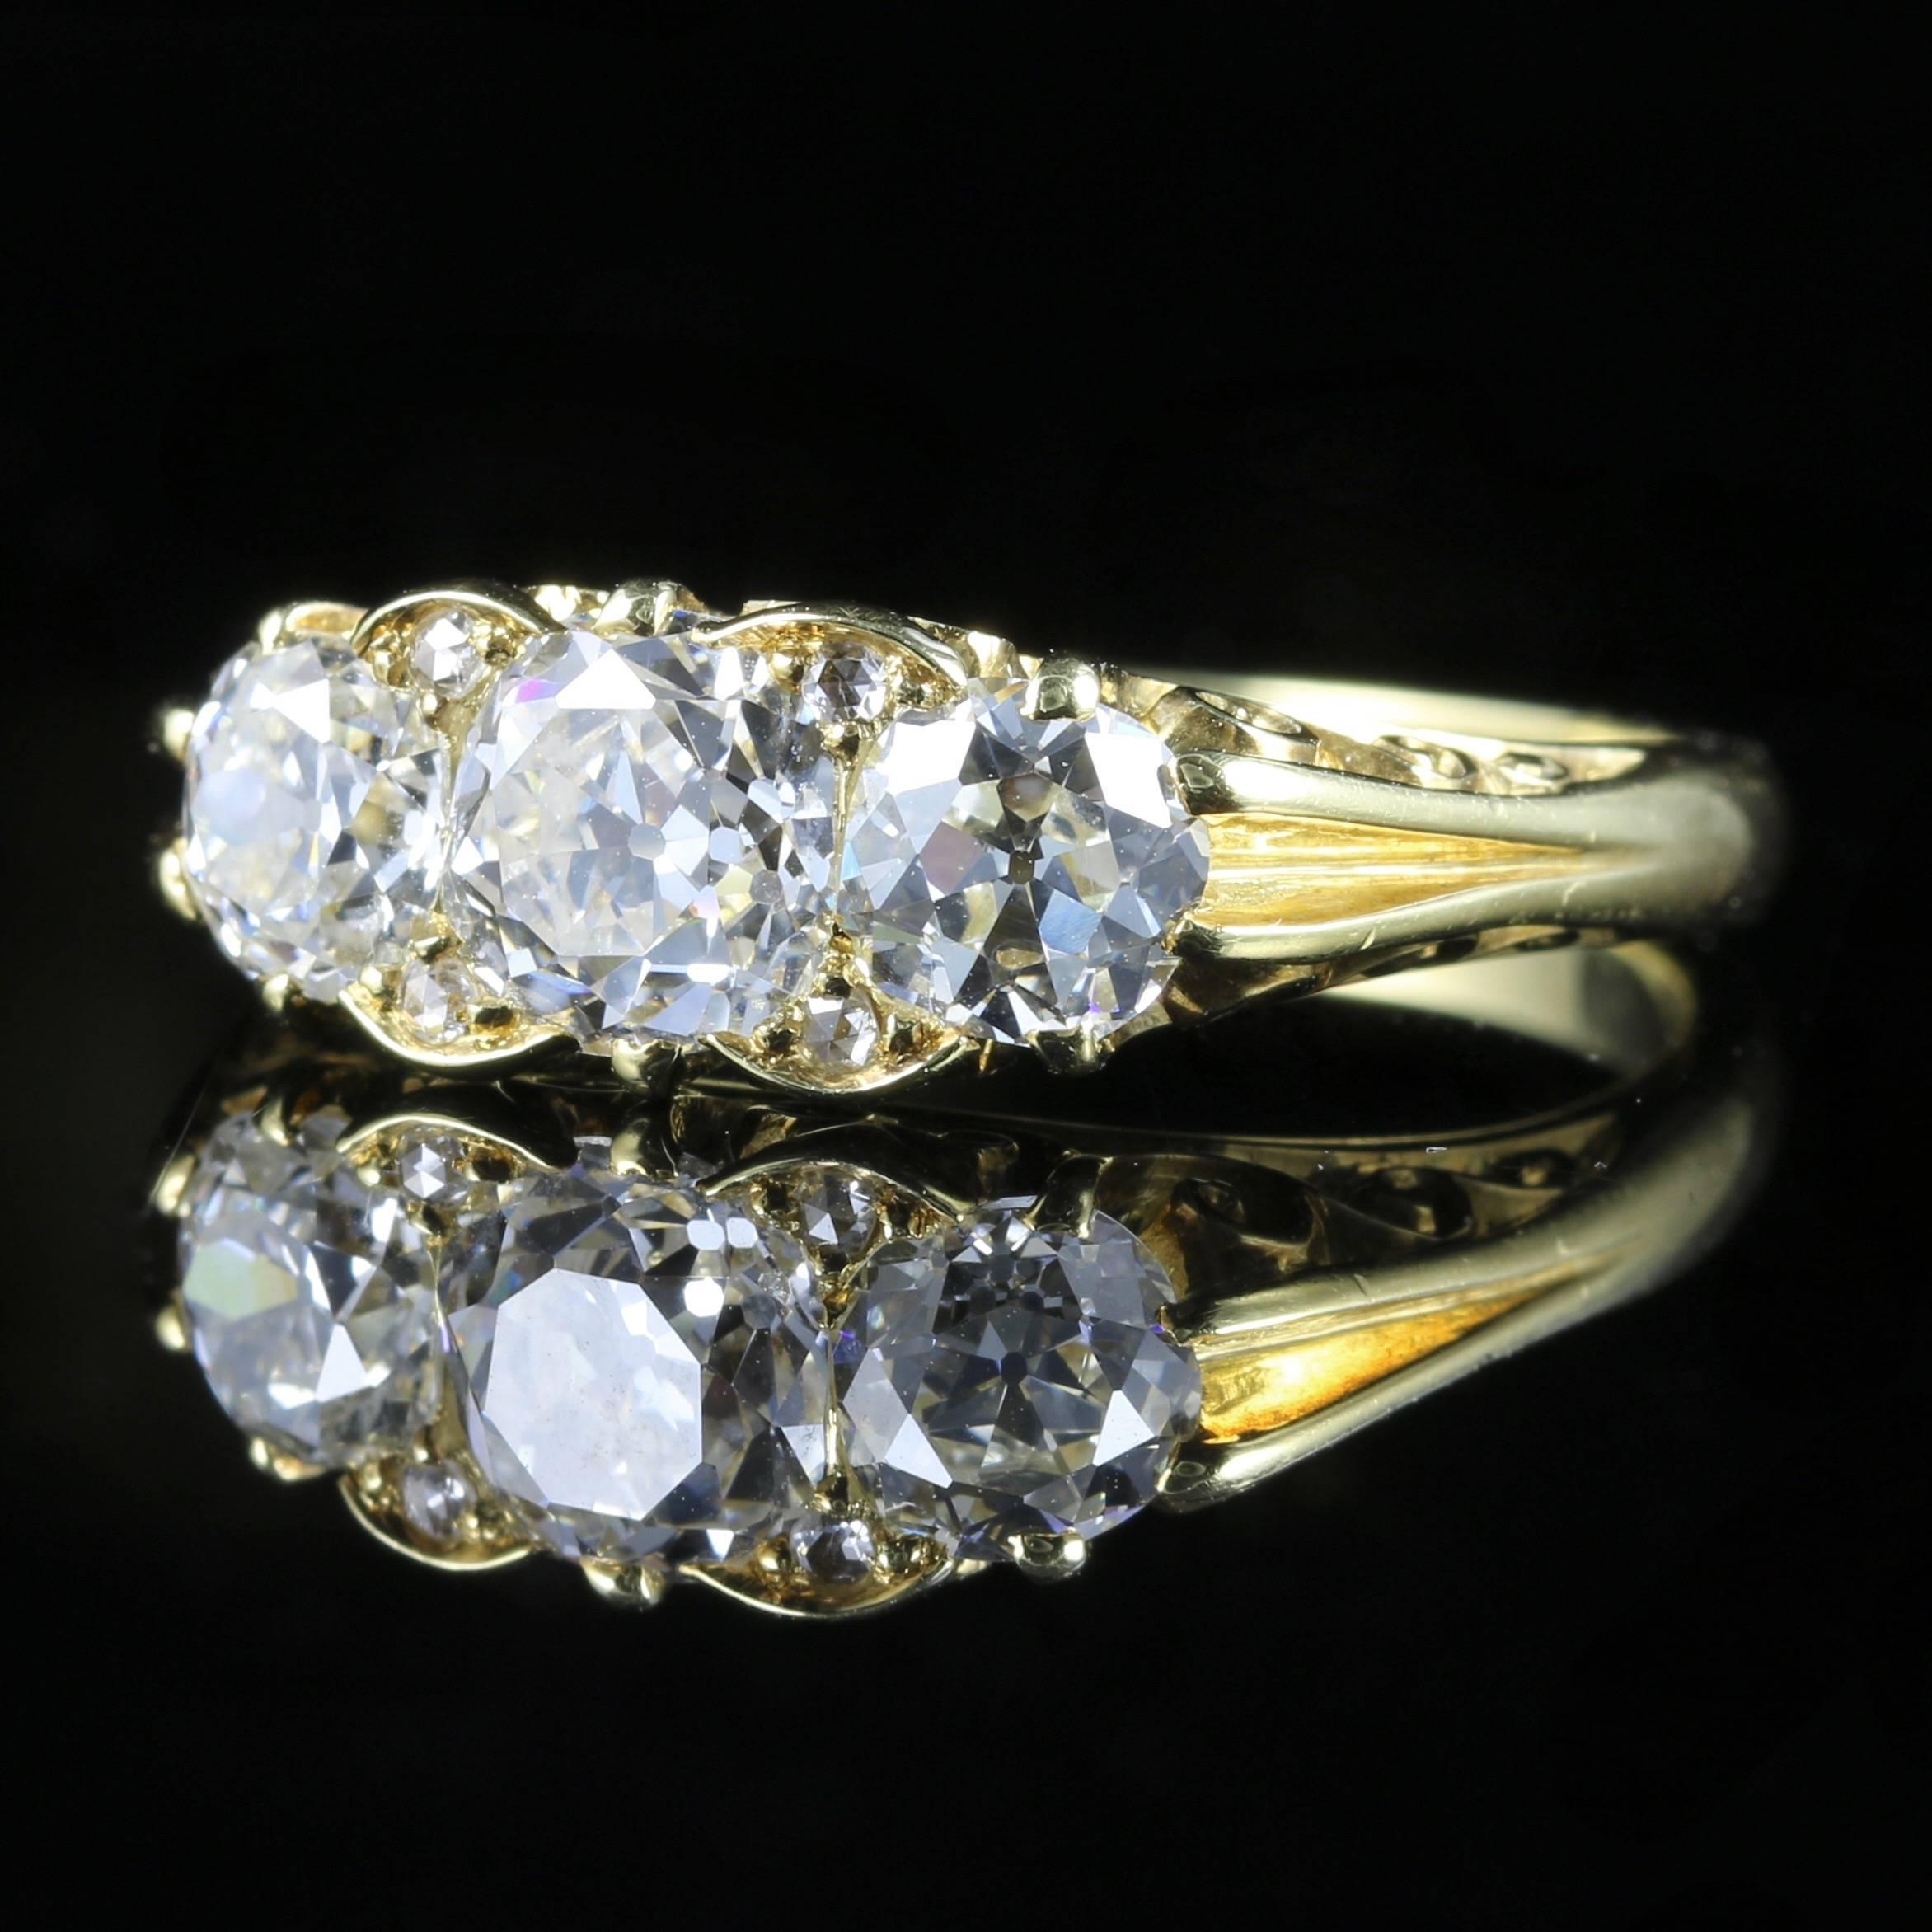 This fabulous 18ct yellow gold ring is genuine Antique Circa 1880. 

Set with 2ct of beautiful Old Cut Diamonds that are SI 1 H Colour.

Three sparkling diamonds are Circa 1880 and original to the gallery.

The Diamonds are very clear bright white